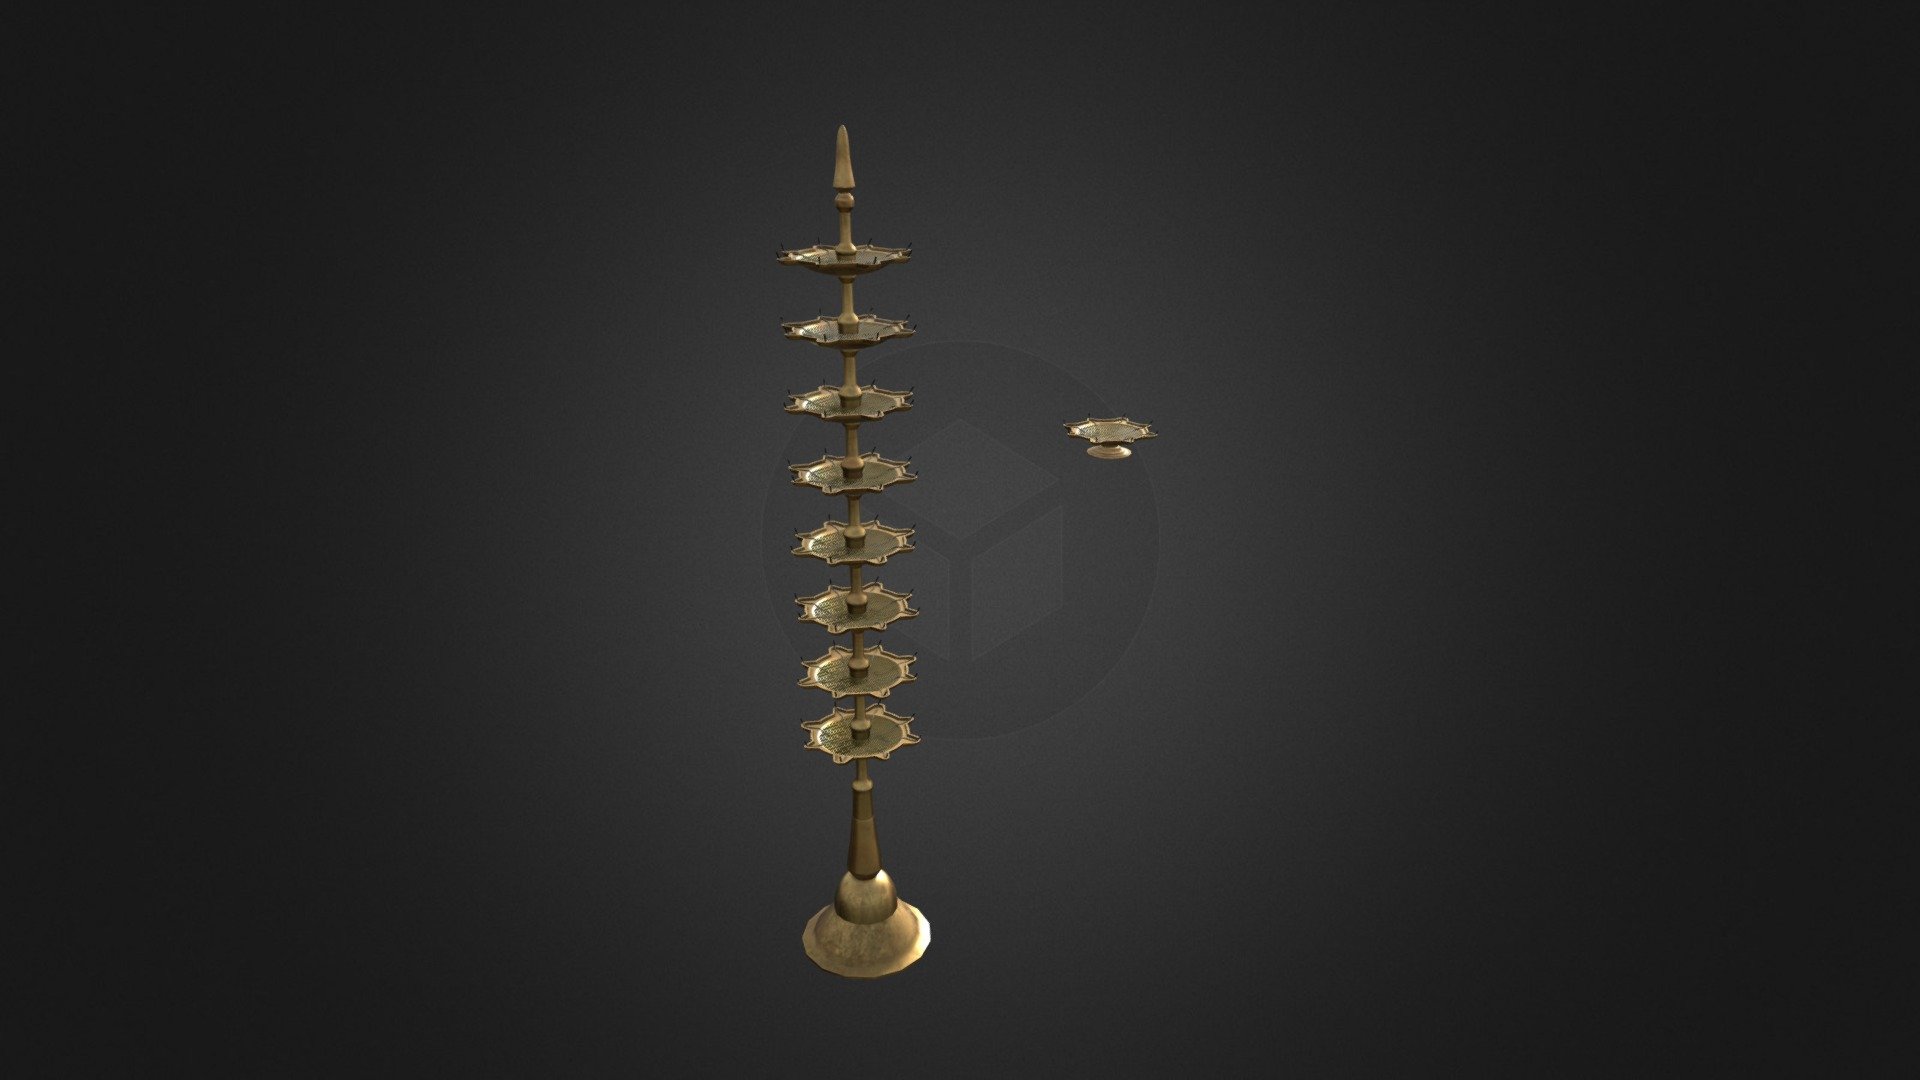 Inauguration Lamp low polygon game ready, AR, VR and other realtime app ready, A multi purpose  traditional Indian oil lamp 3d model